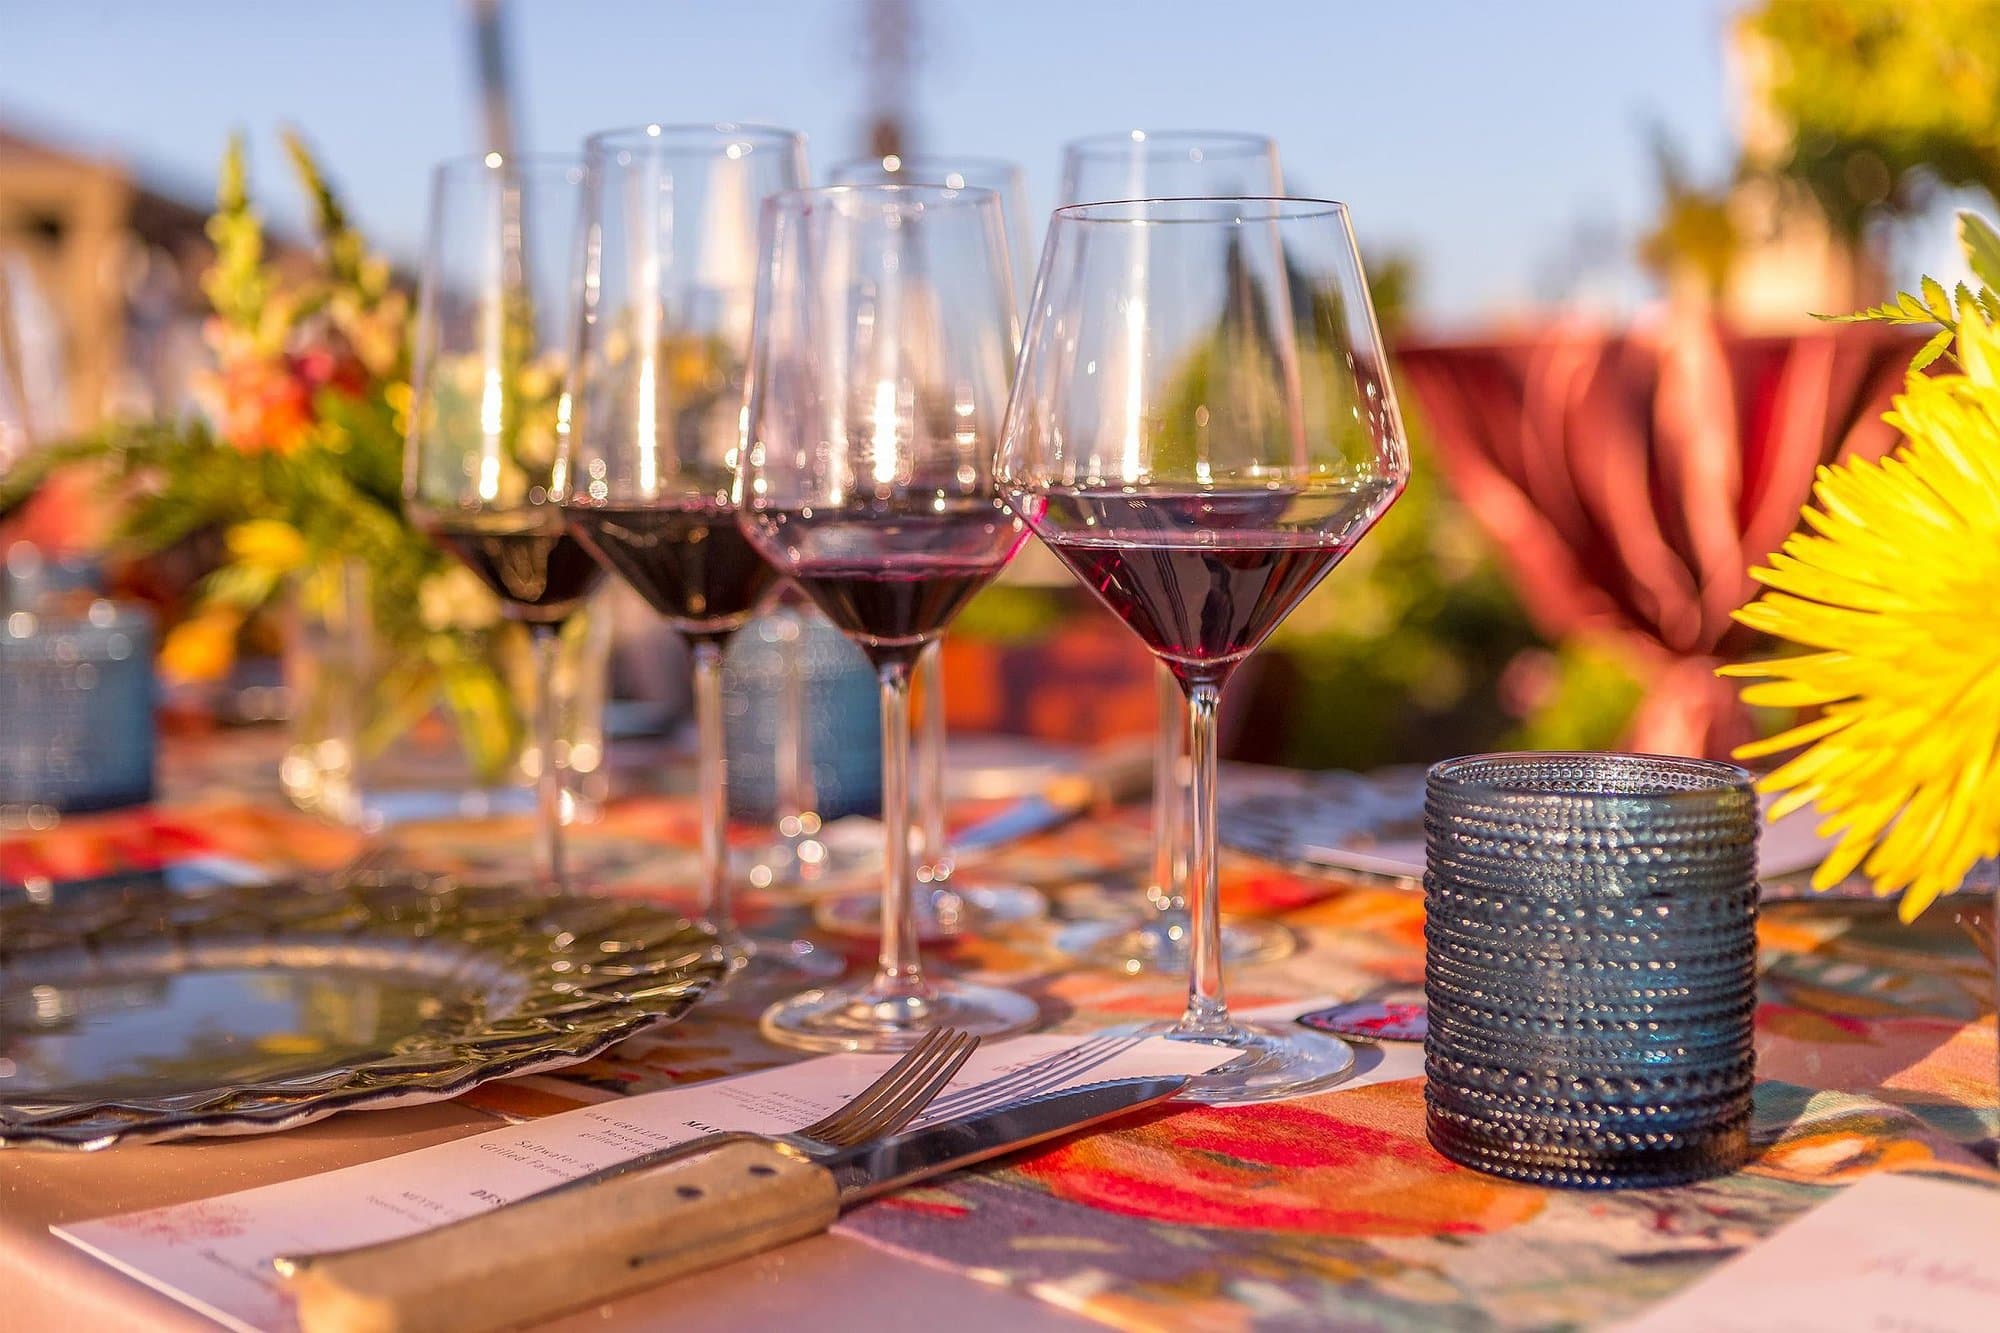 A red wine tasting flight in wine glasses at a set table